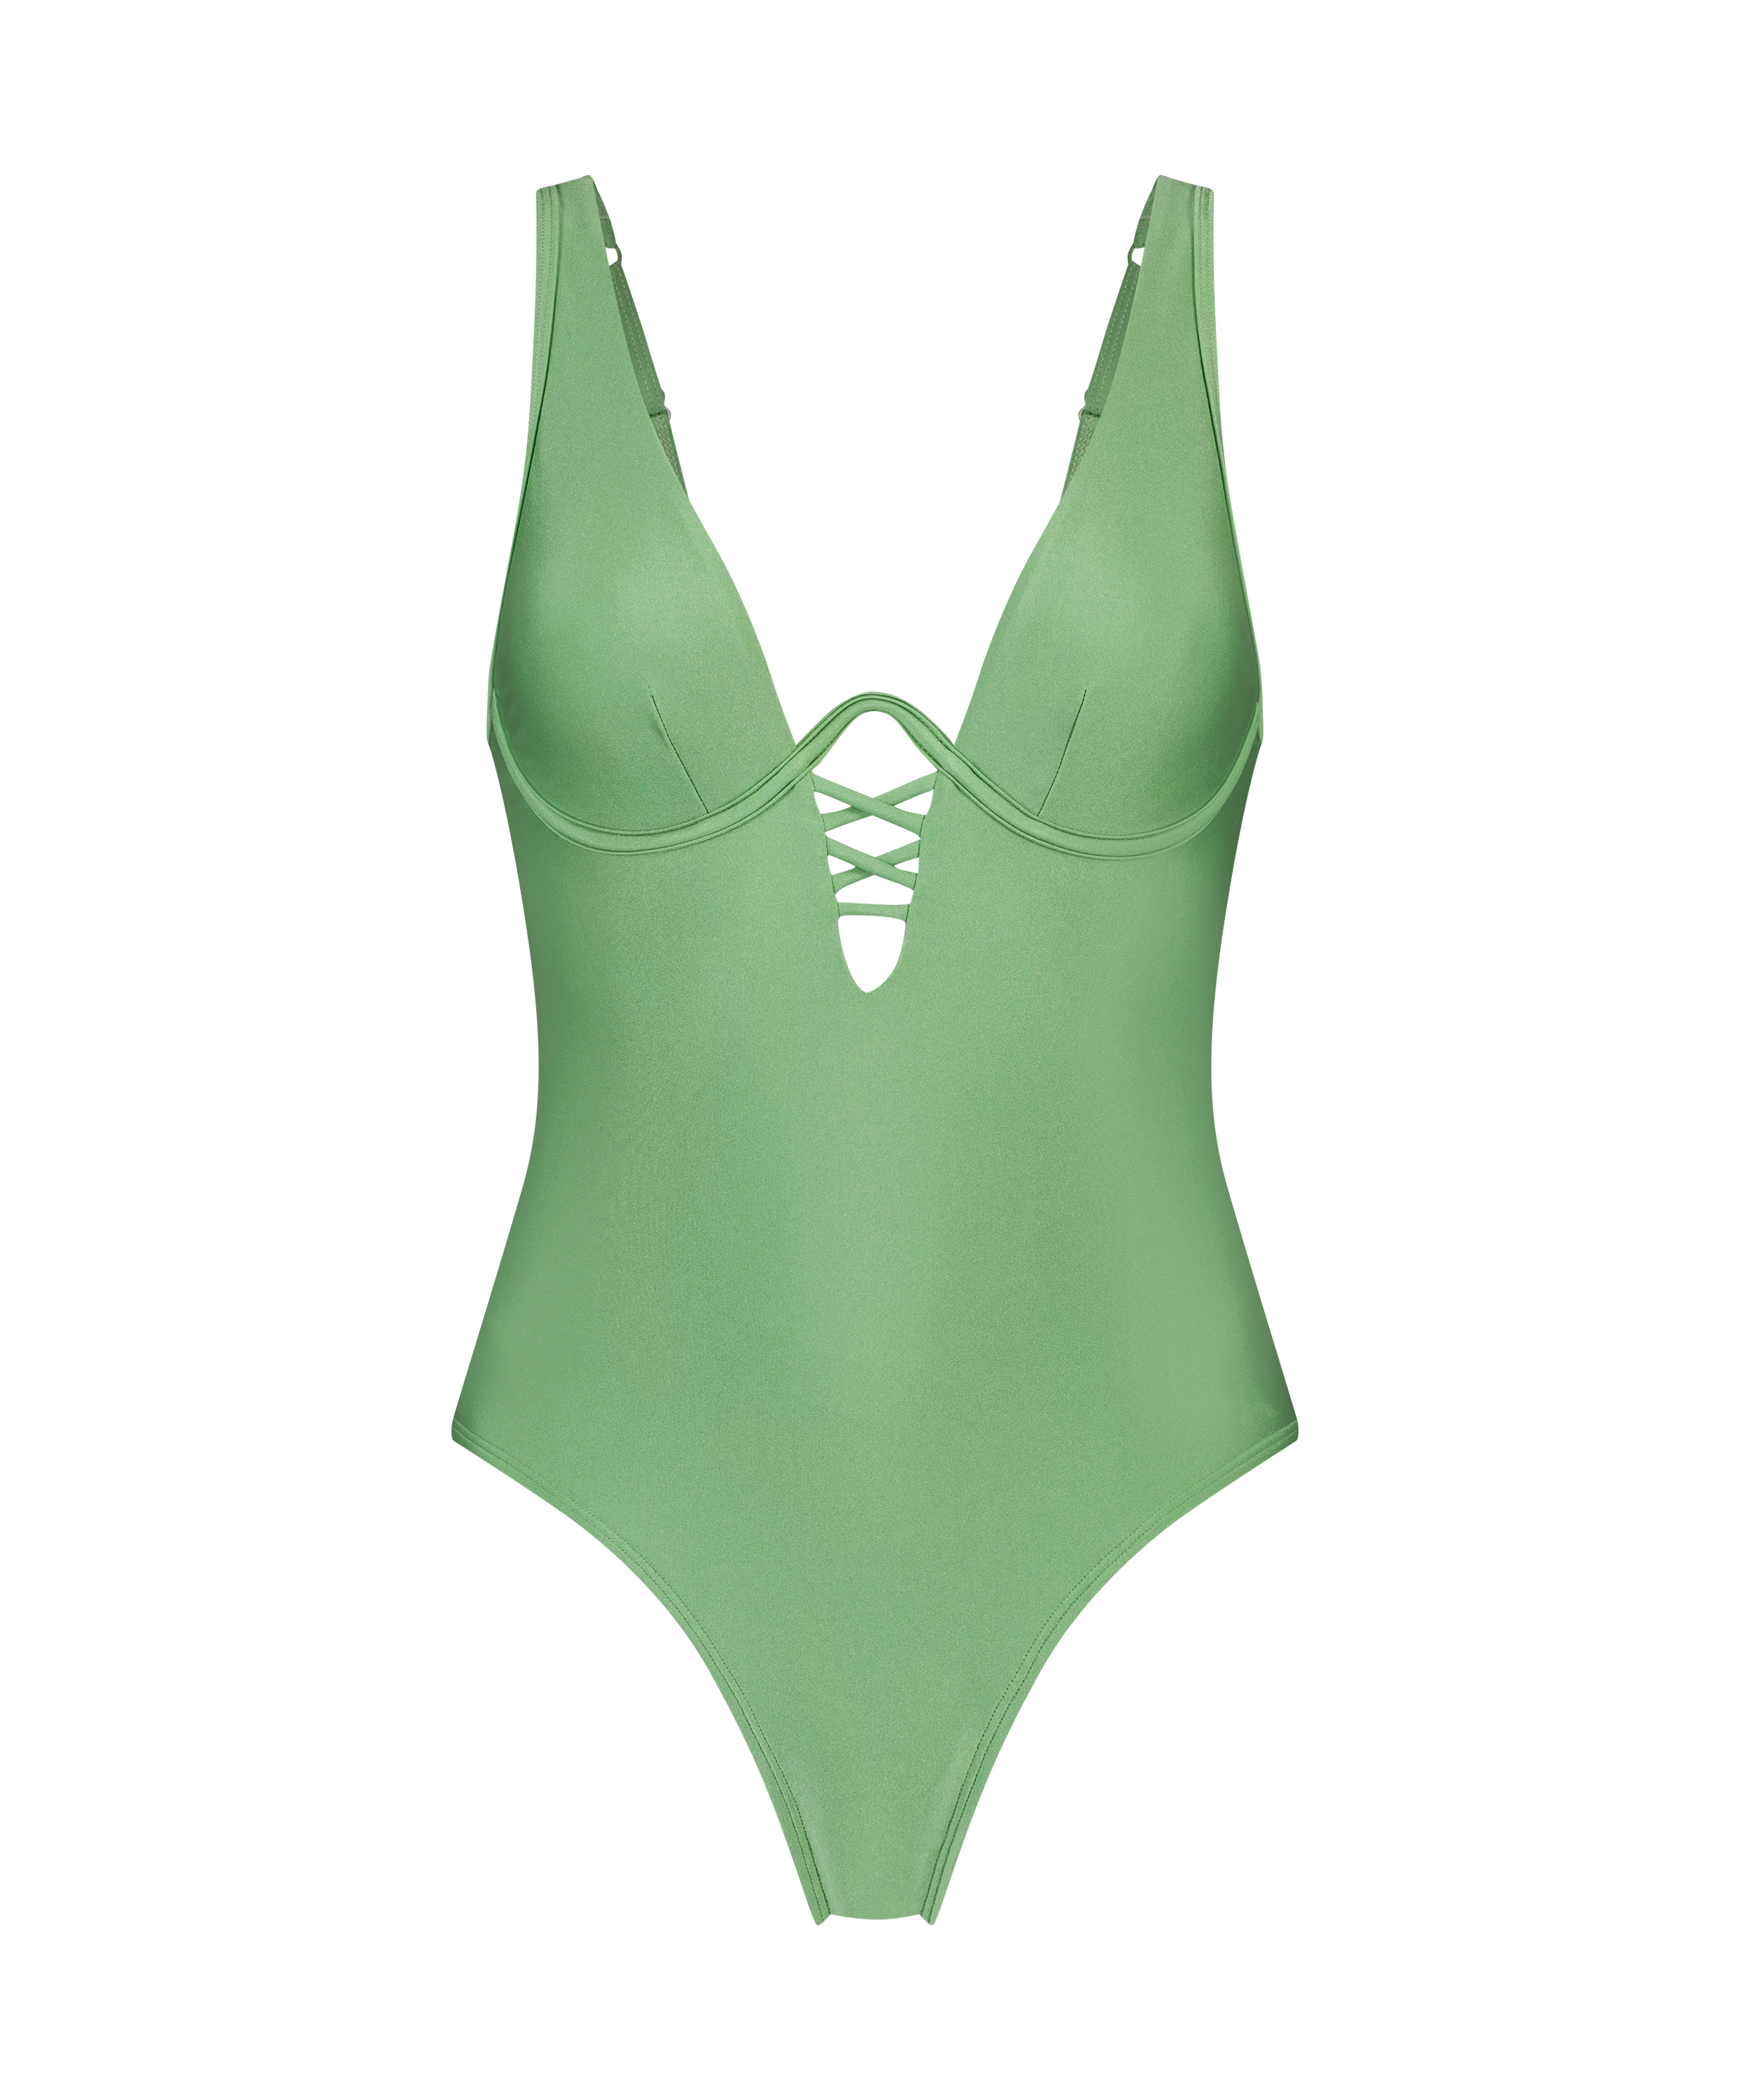 Mauritius high swimsuit for £40 - Swimsuits - Hunkemöller